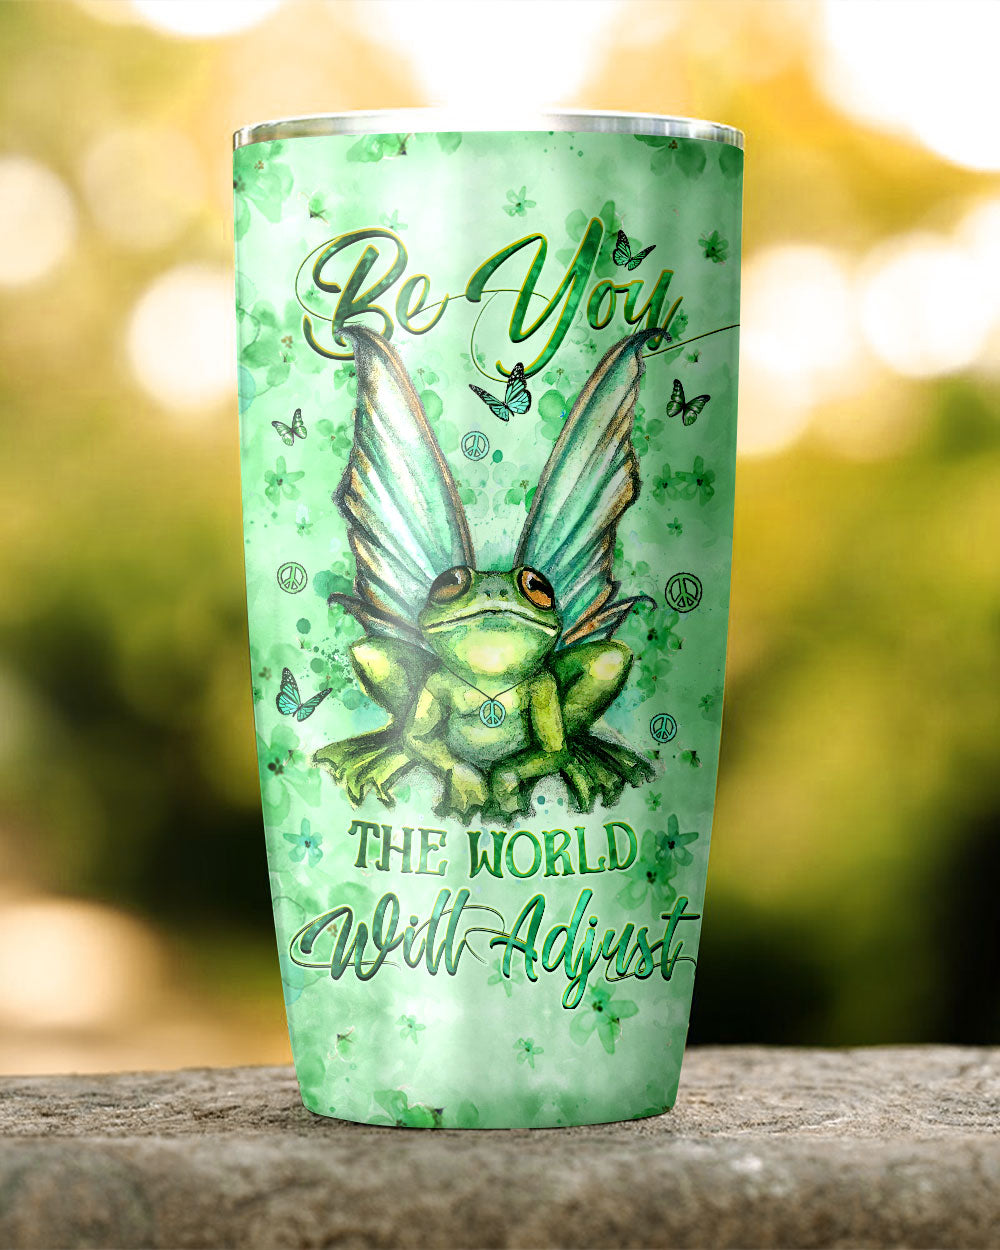 BE YOU THE WORLD WILL ADJUST TUMBLER - YHHG2208234